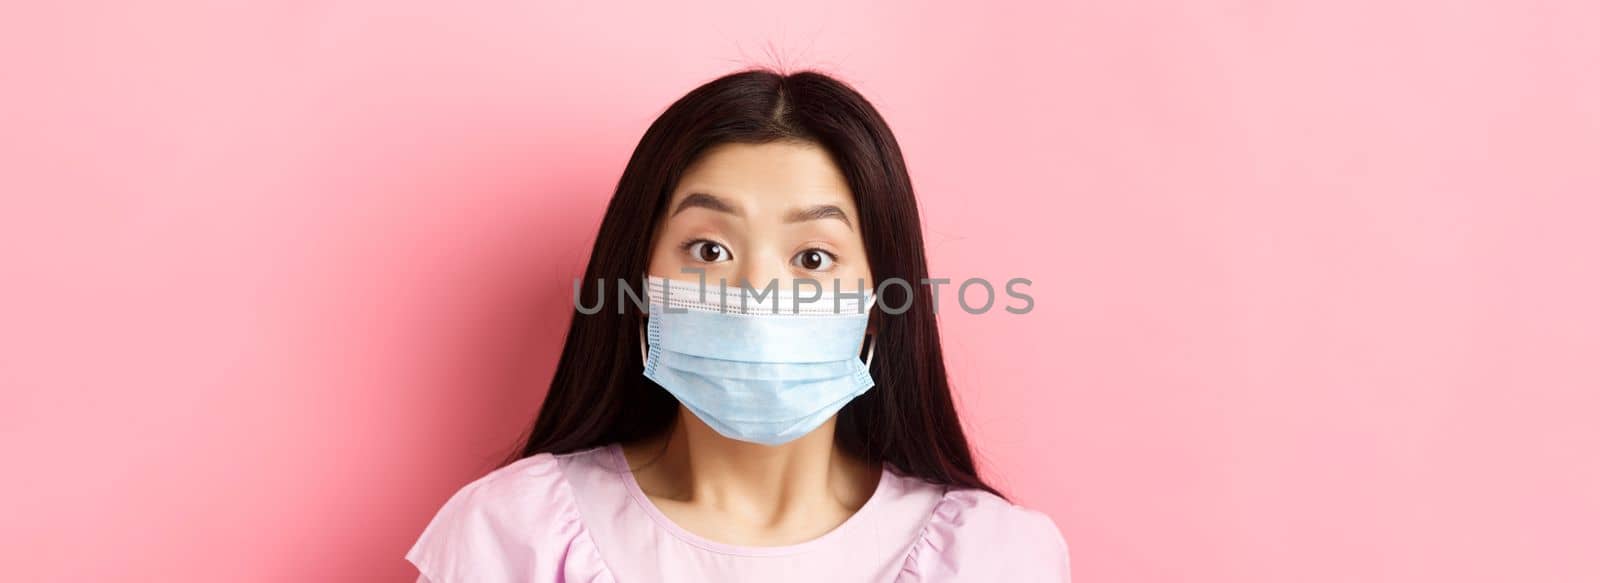 Covid-19 and healthy people concept. Close-up portrait of surprised asian girl in medical mask looking excited at camera, standing against pink background.